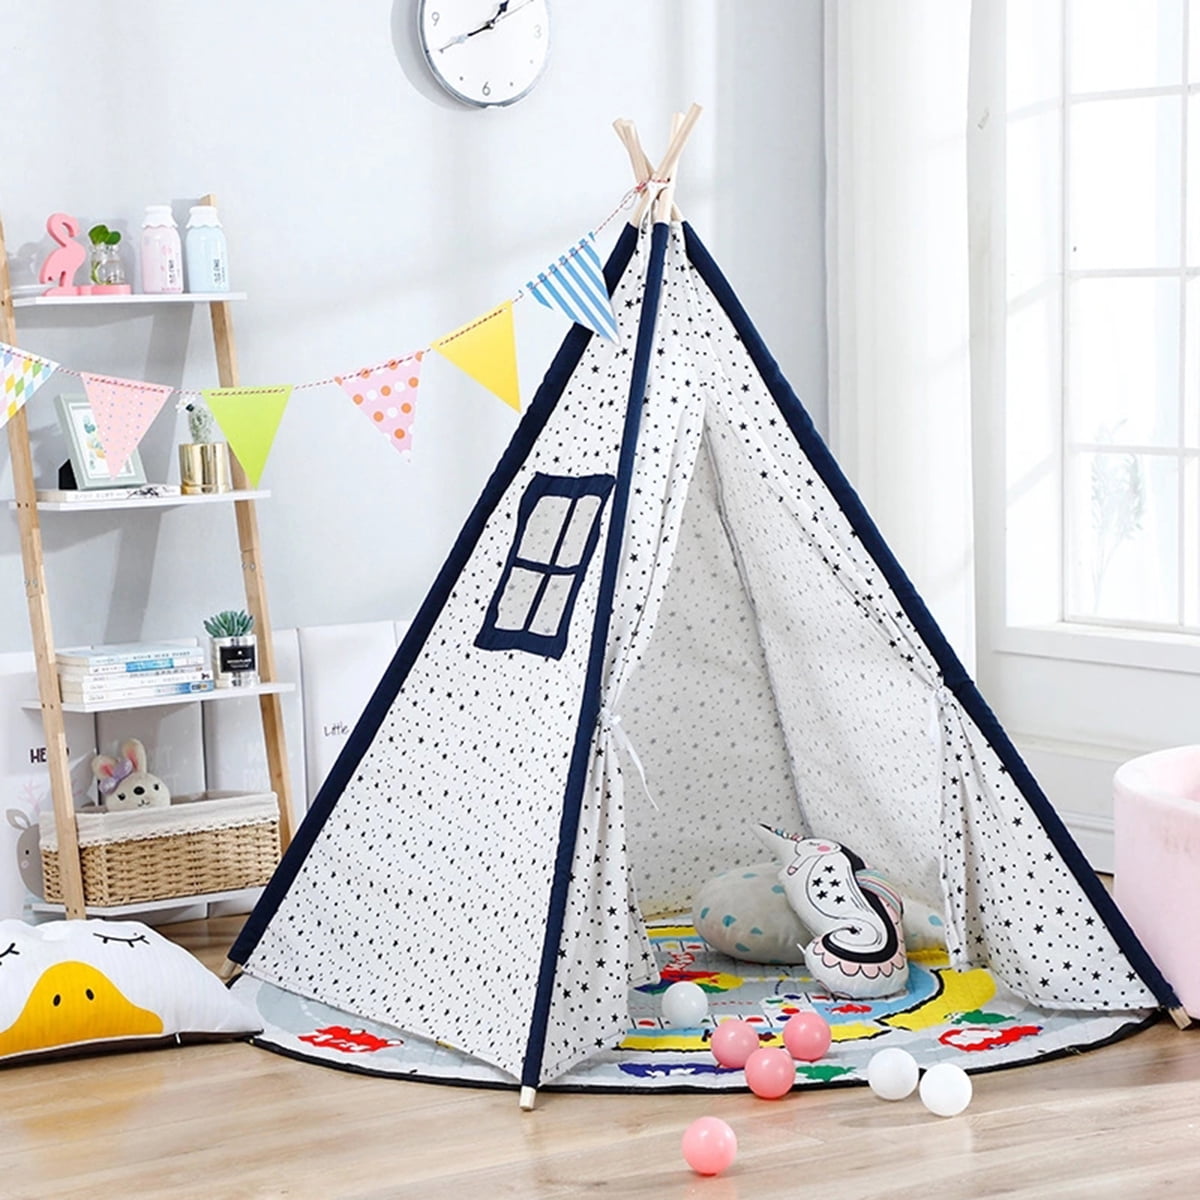 135cm Kids Play Tent House Indoor Outdoor Teepee Wigwam Toy Castle Princess 